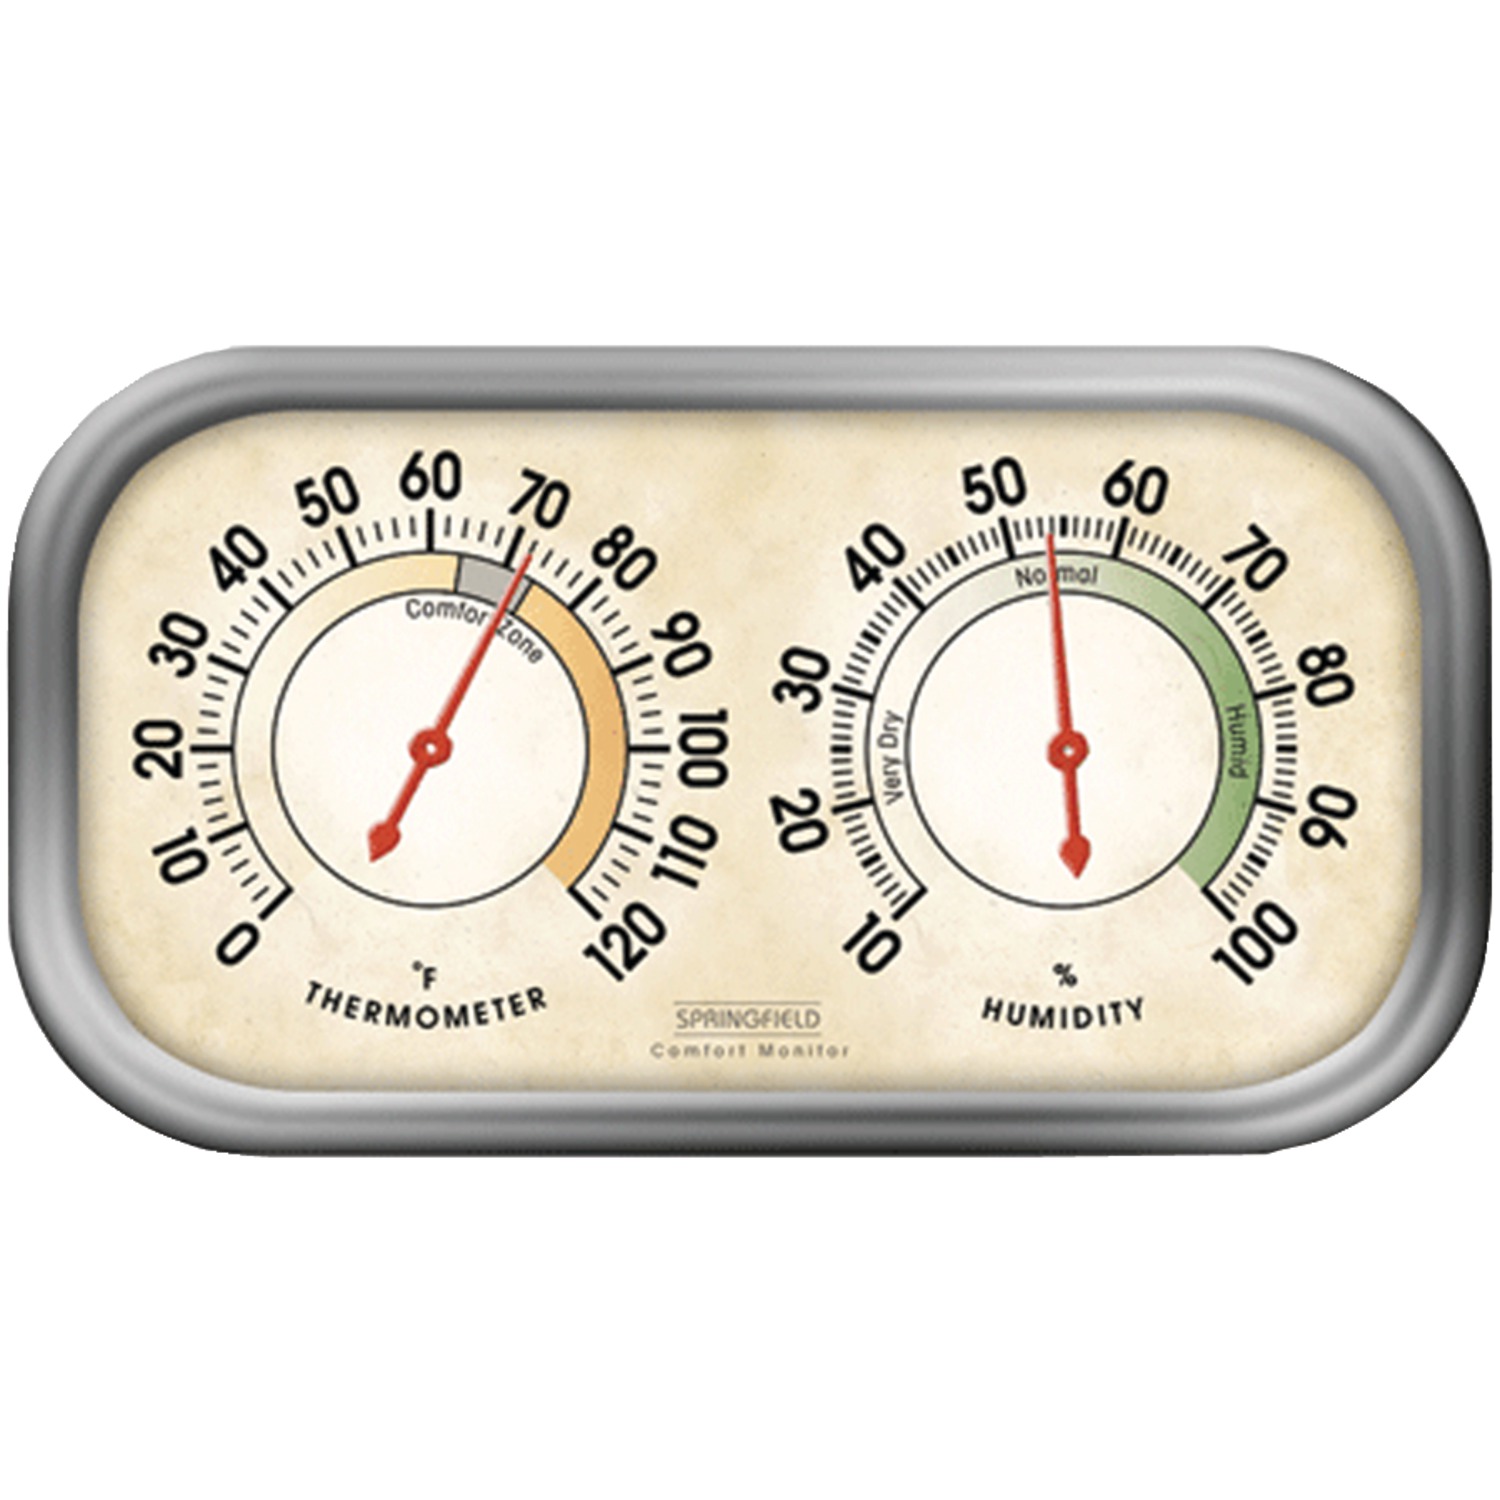 Springfield Precision 90113-1 Humidity Meter & Thermometer Combo - image 1 of 2